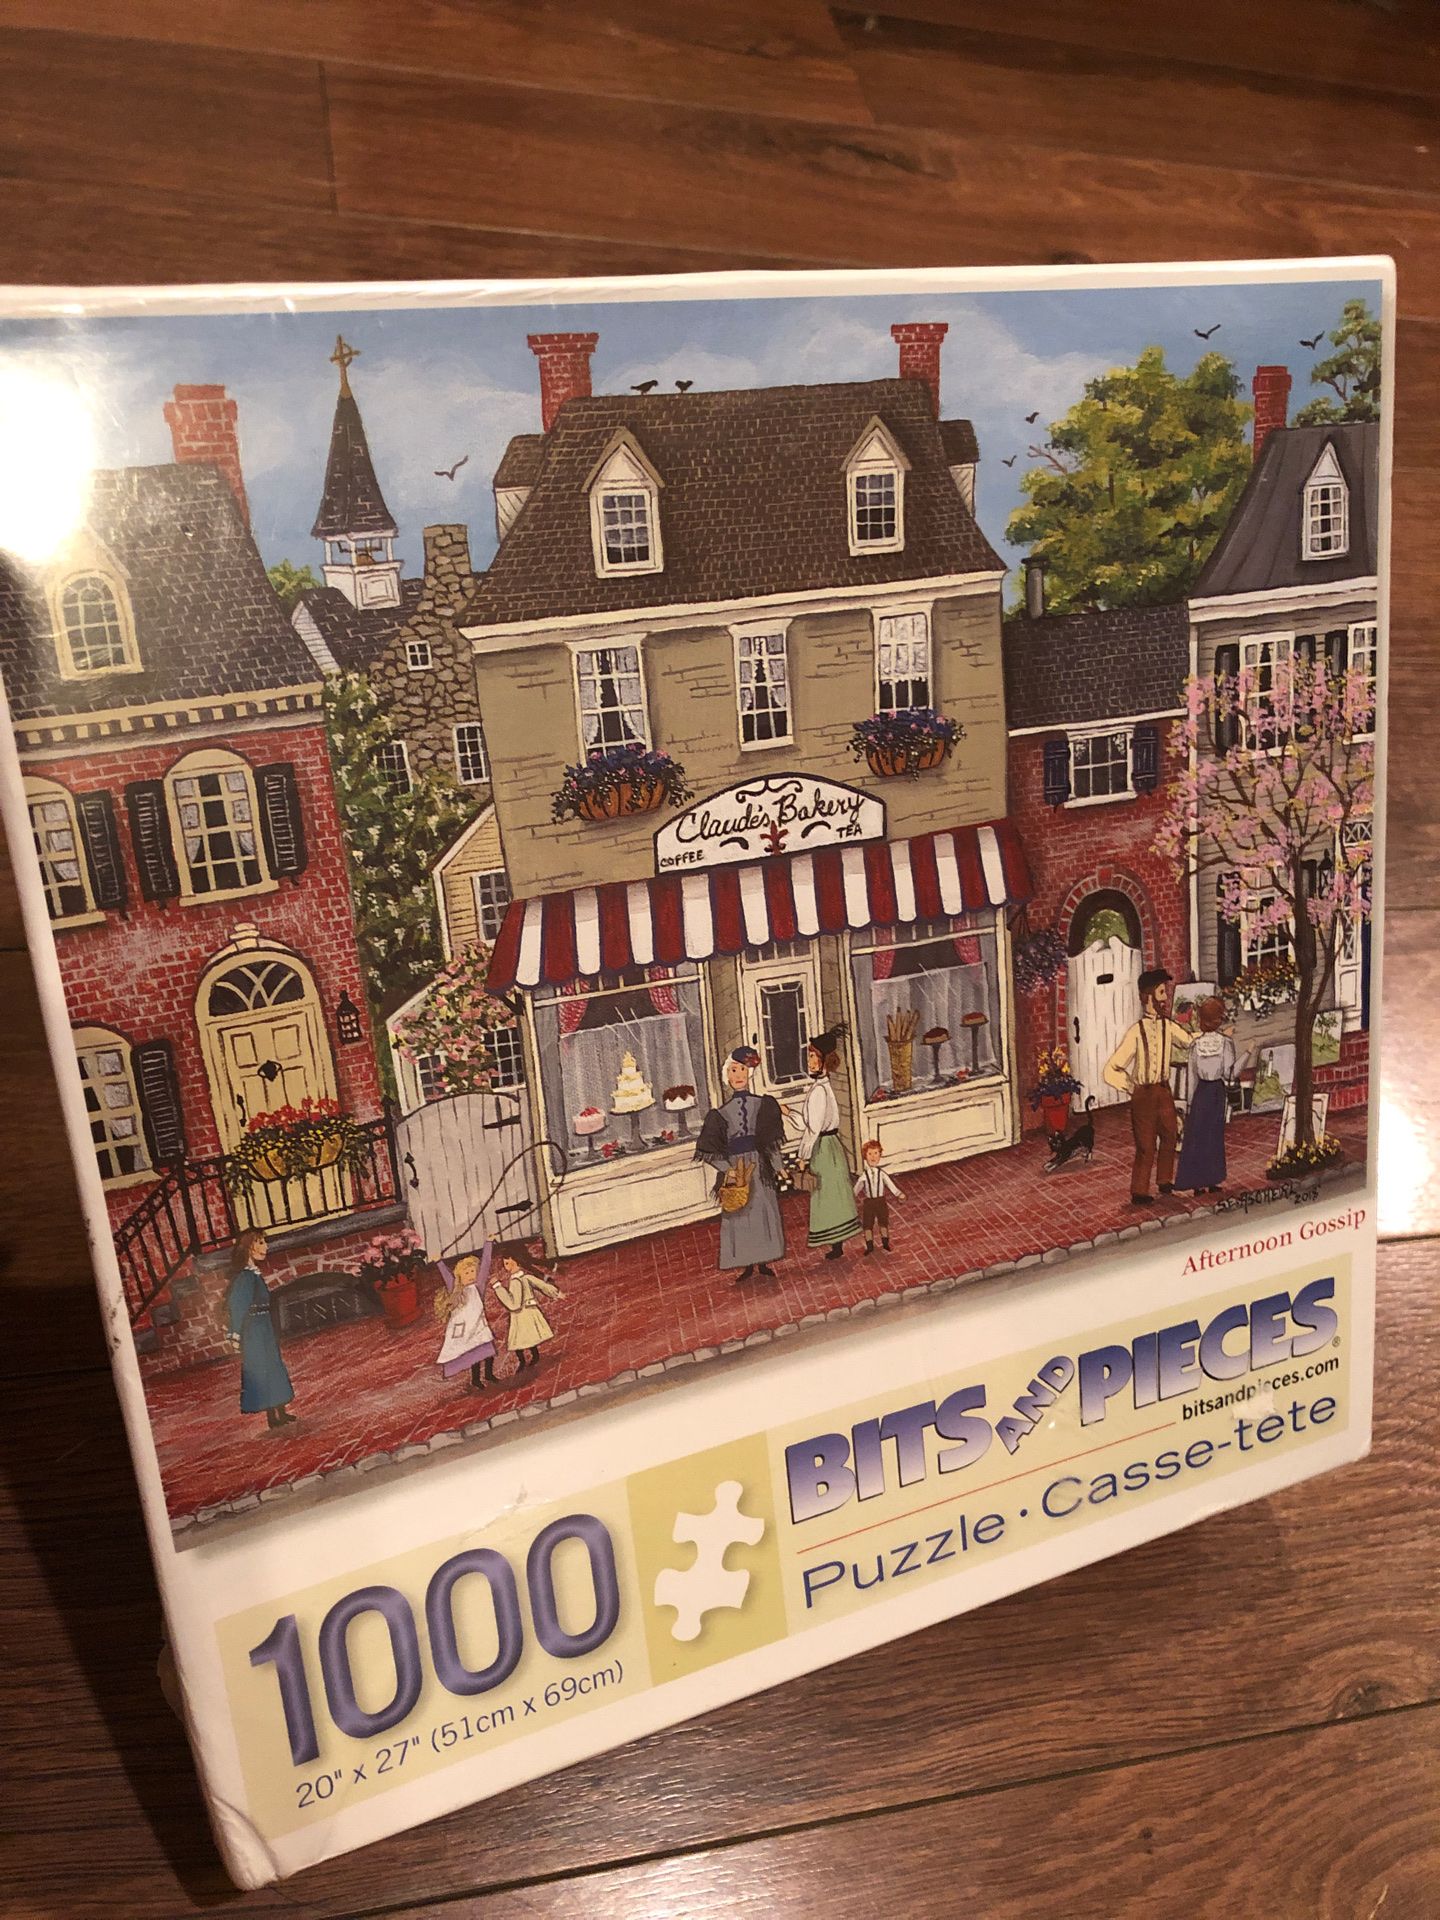 New 1000 piece puzzle - afternoon gossip theme. Gift